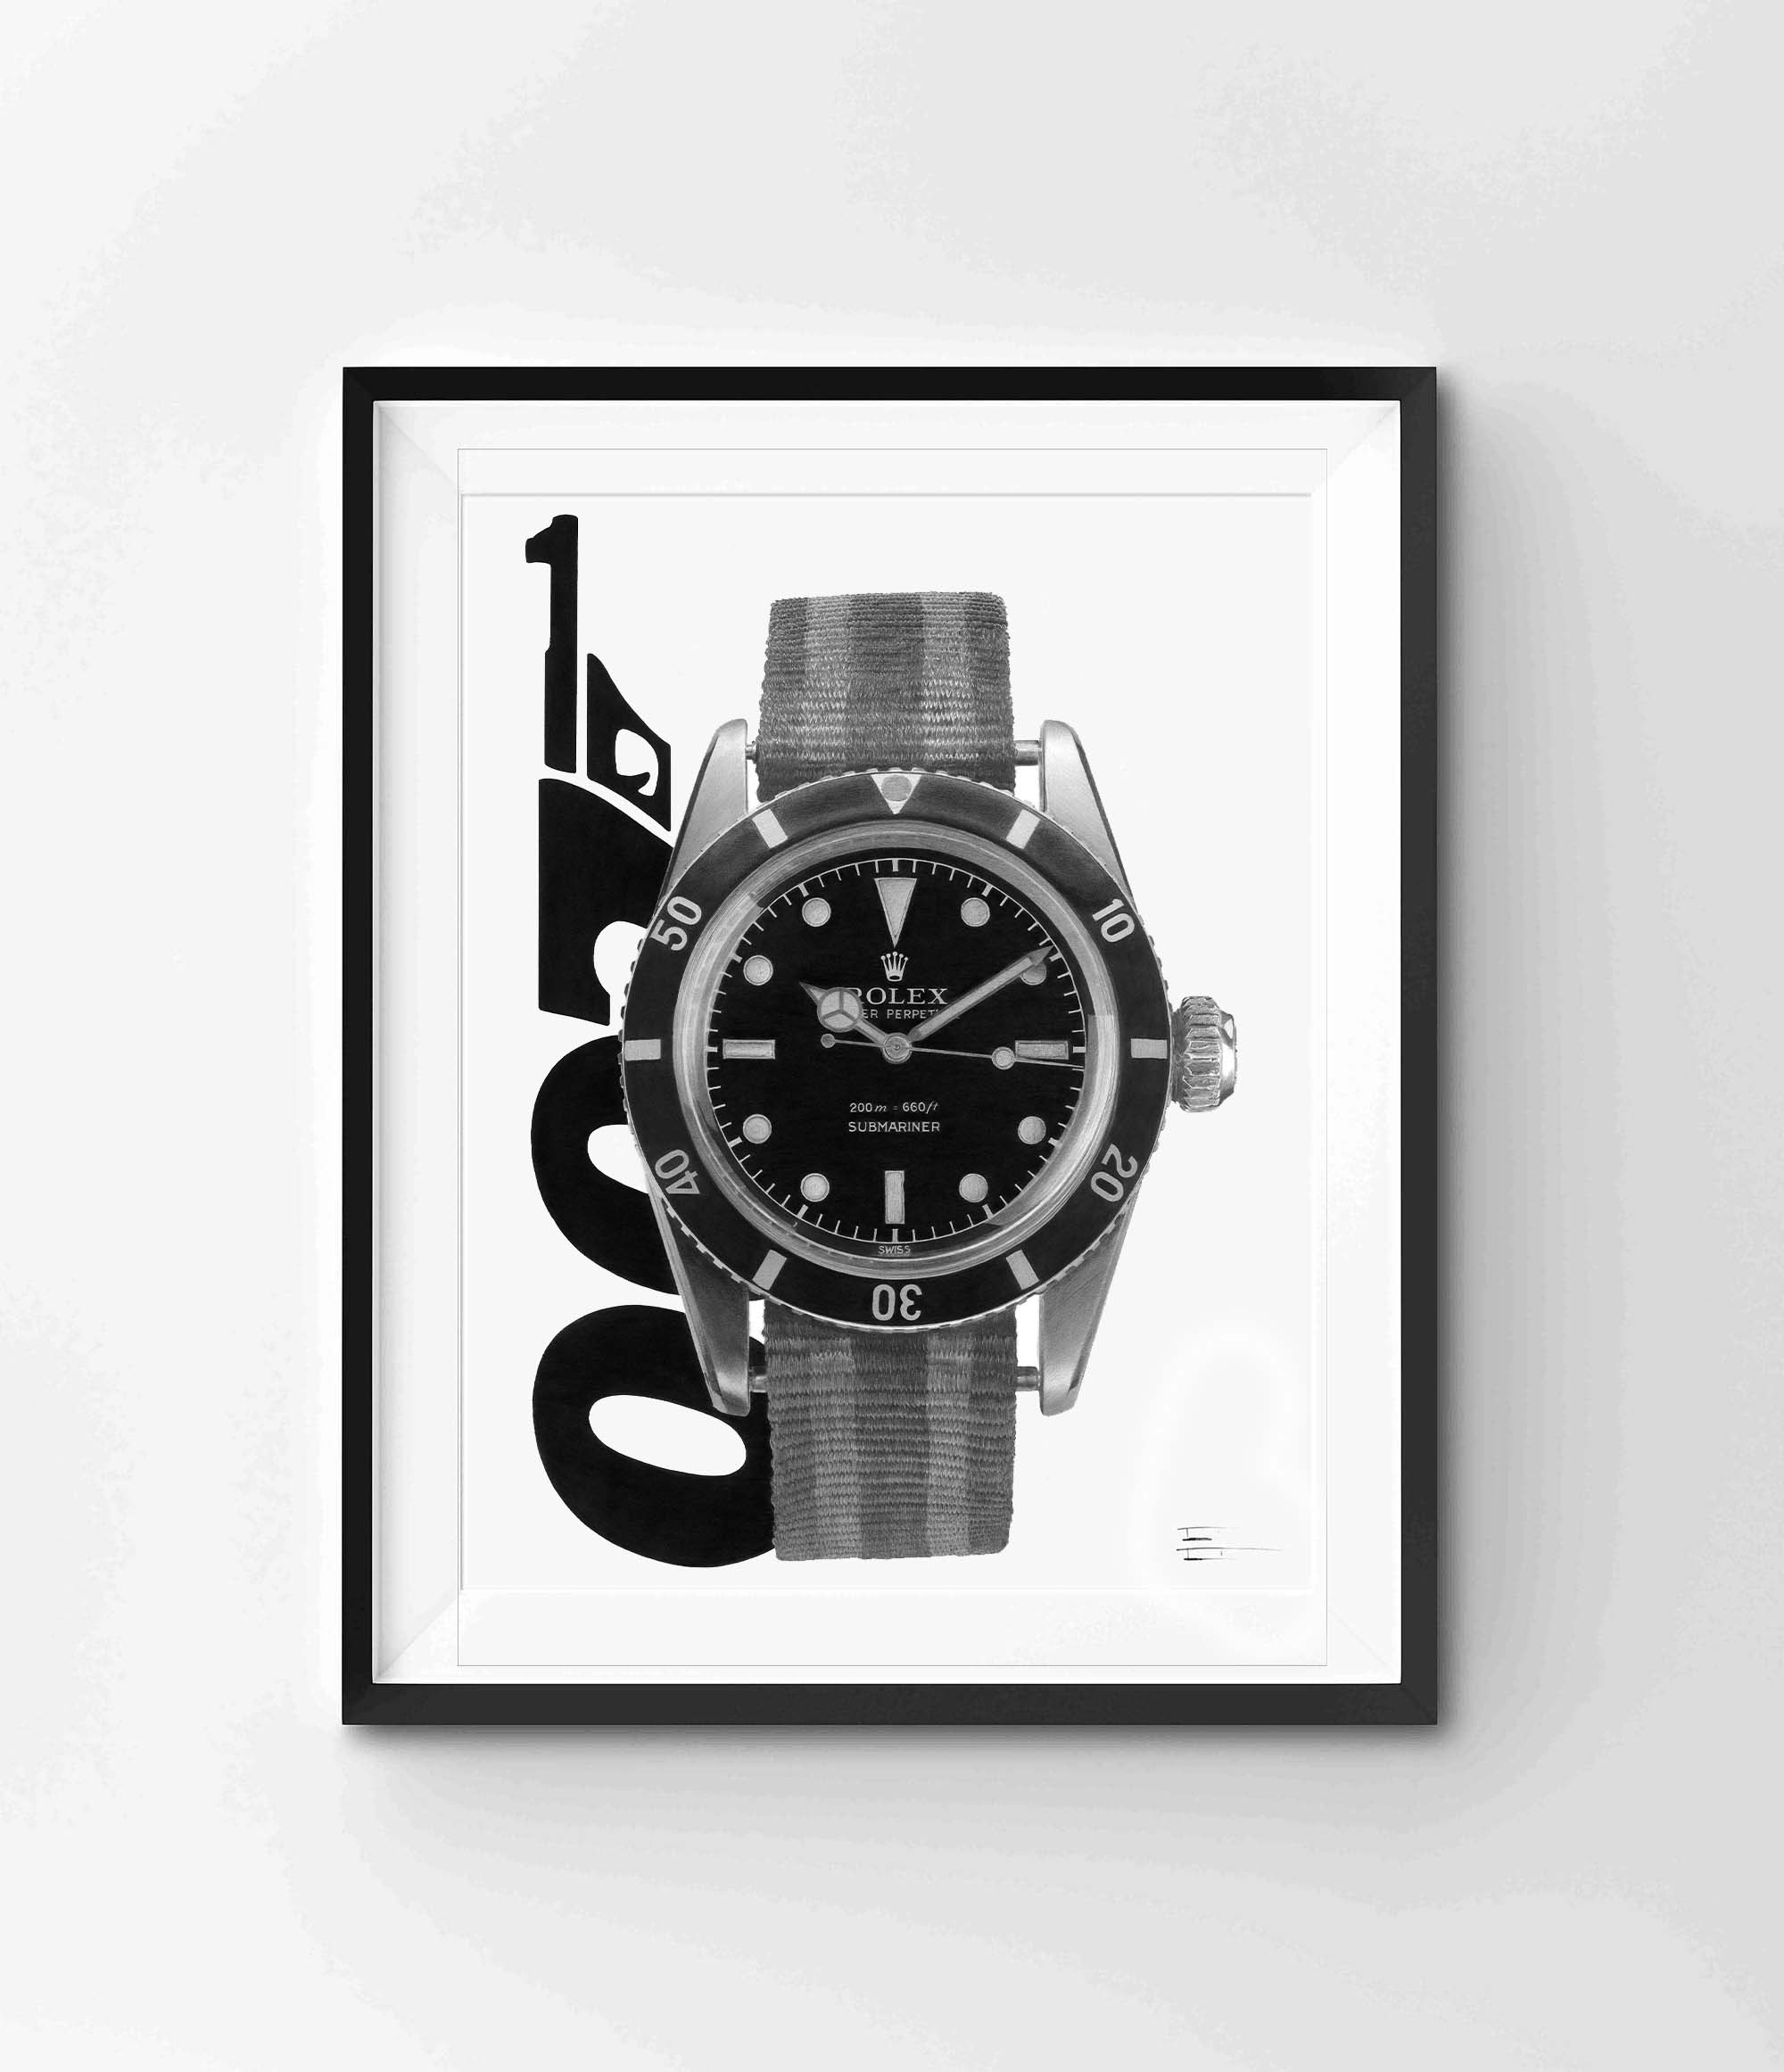 Sult Vanærende Victor Art Tribute To Sean Connery & His Bond Rolex Submariner 6538: New  Horological Artwork On The aBlogtoWatch Store | aBlogtoWatch